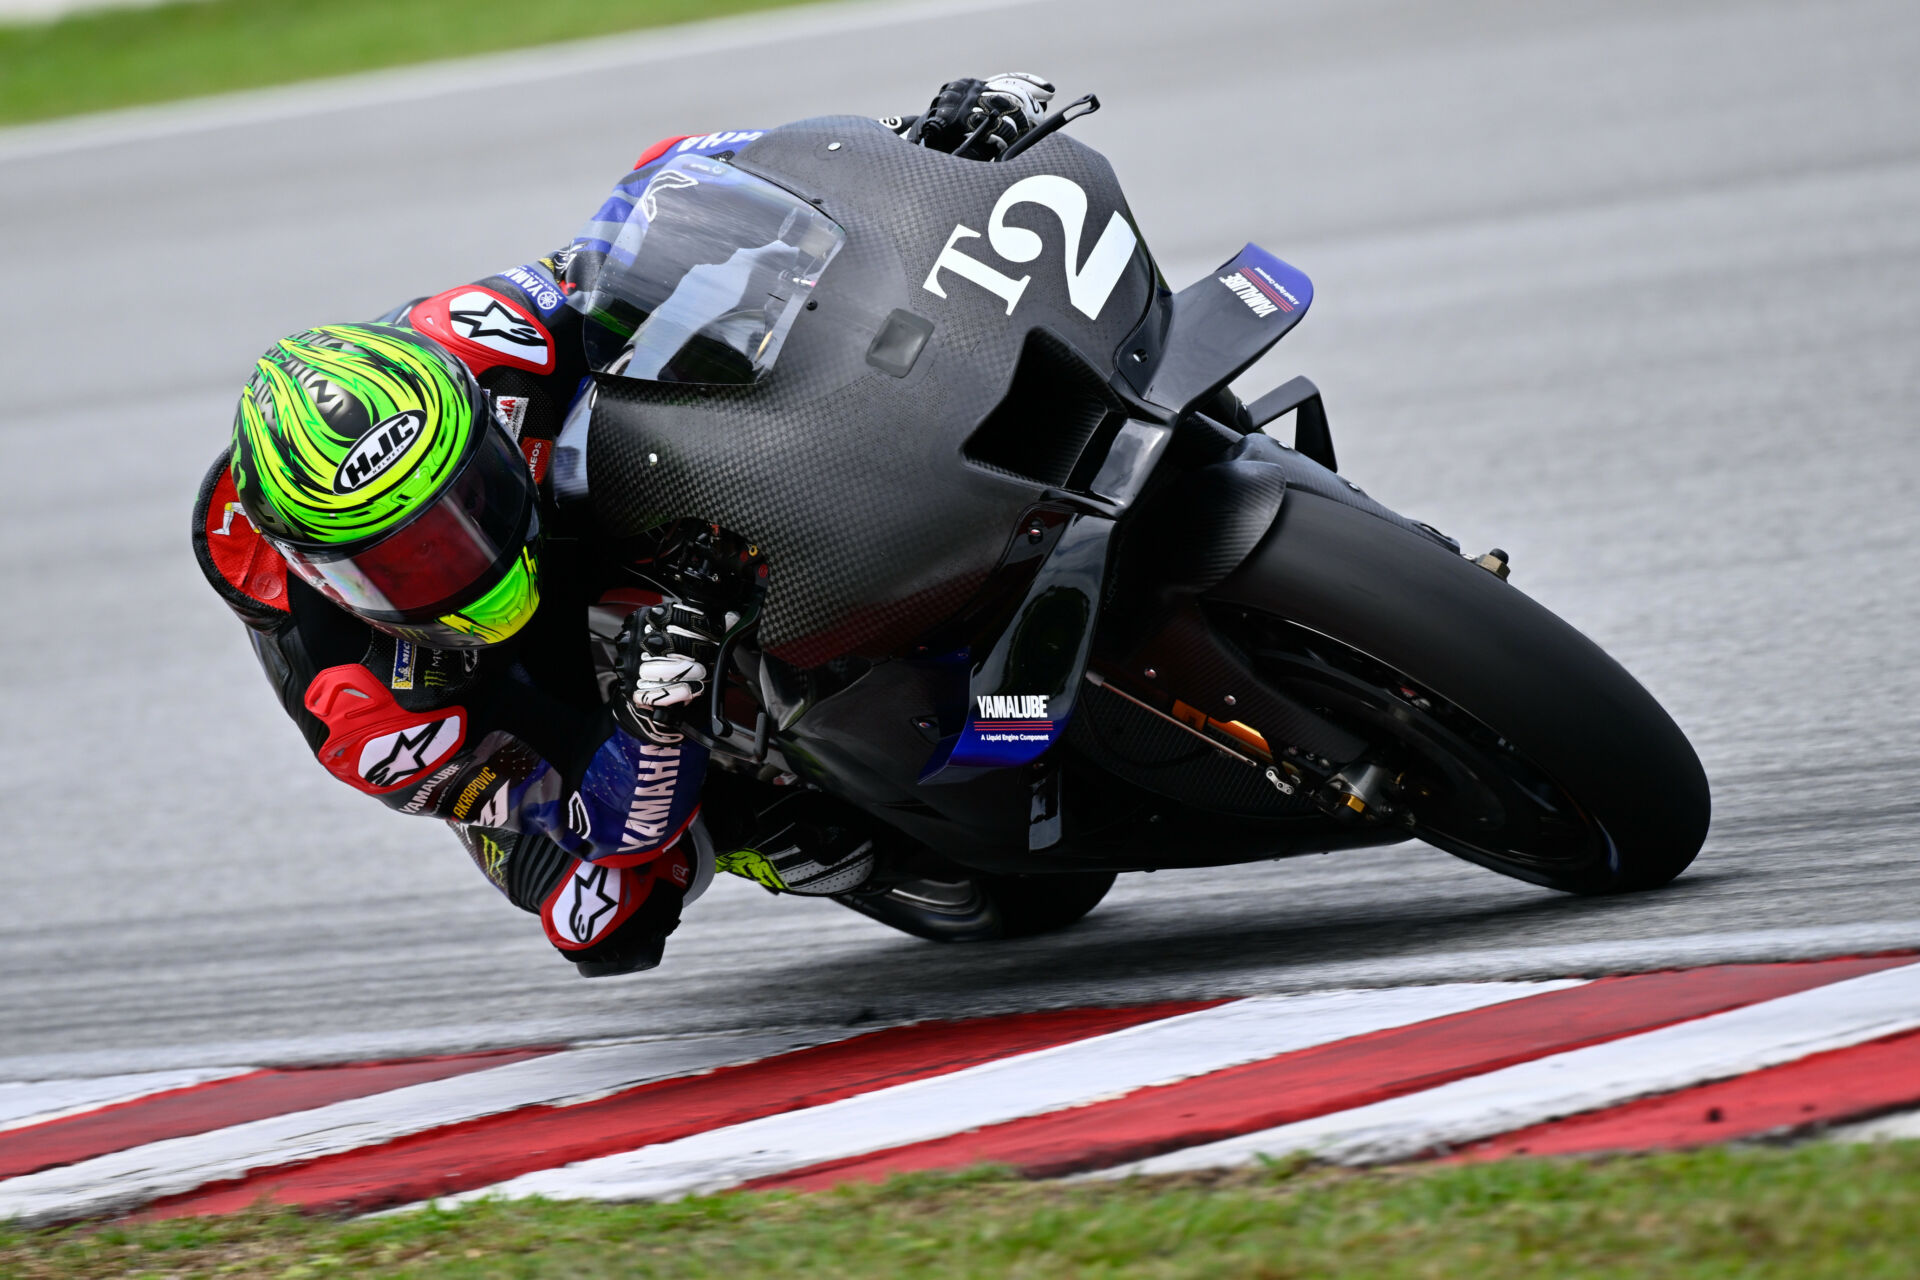 Yamaha test rider Cal Crutchlow (T2) was quickest on Day One of the MotoGP 